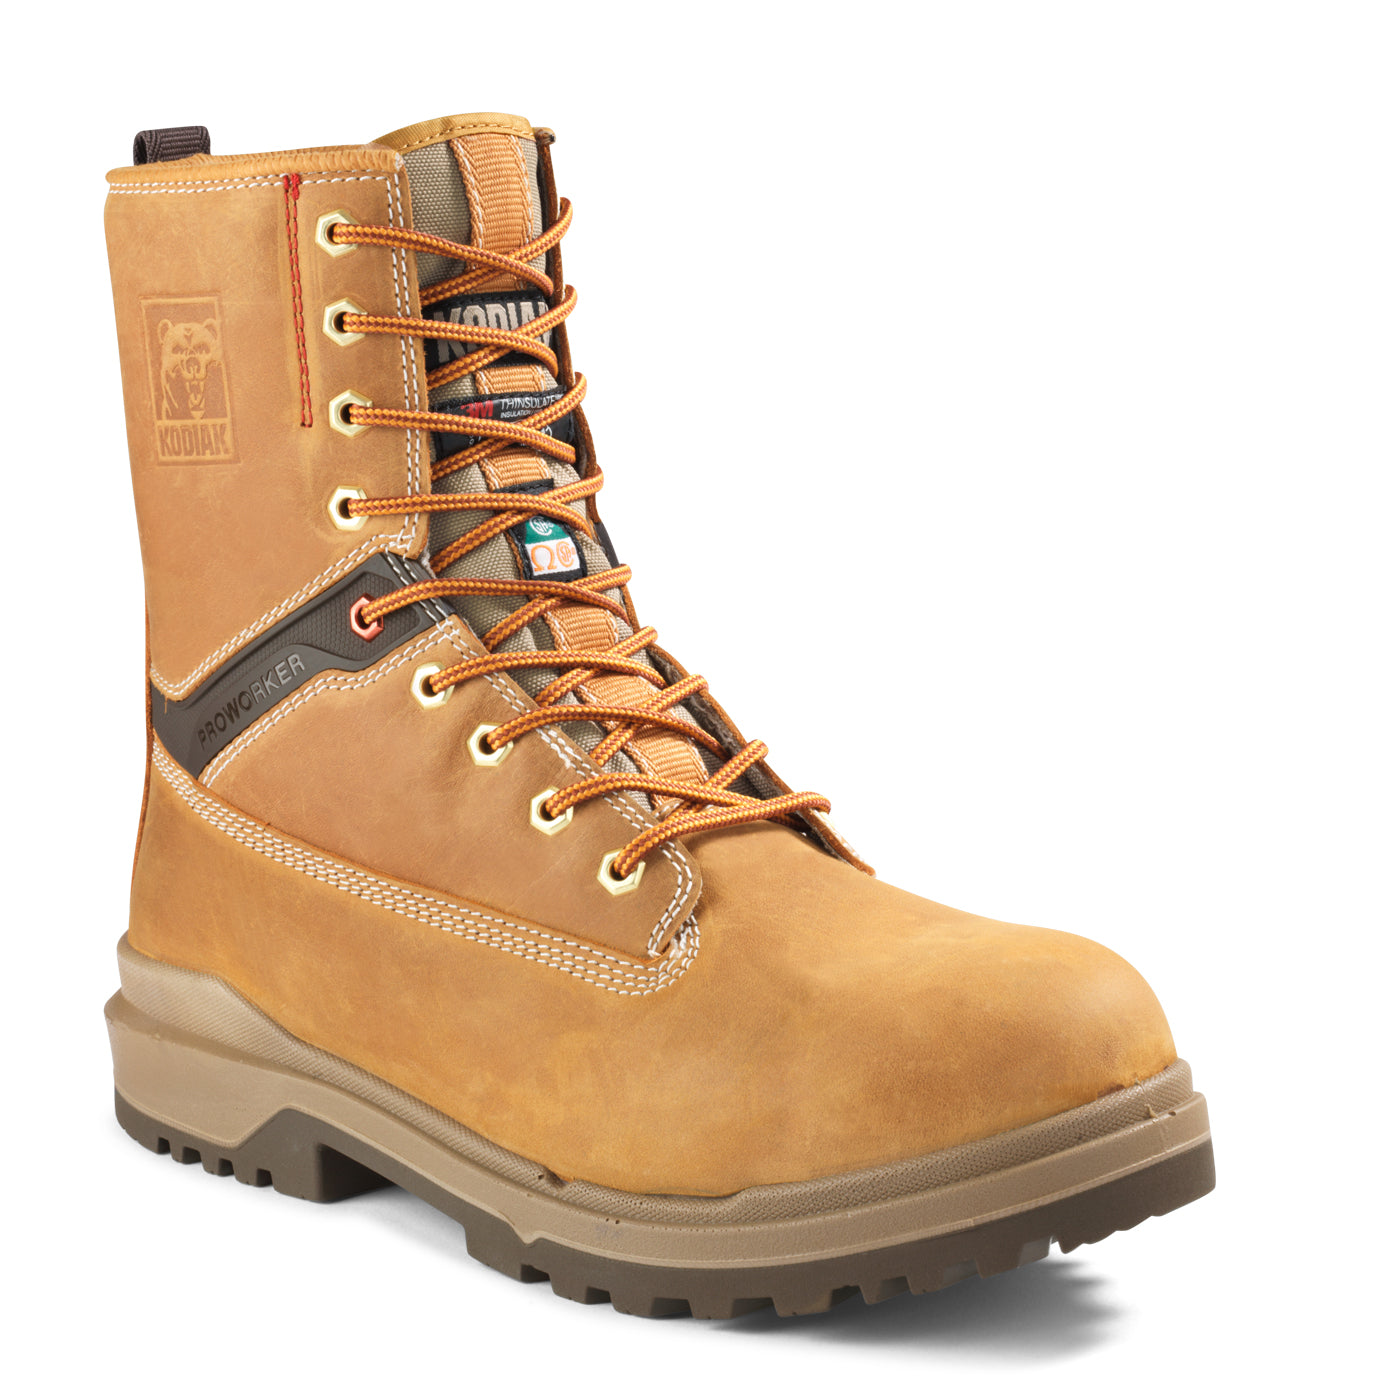 Kodiak 8" Proworker Master Composite Toe 8" Safety Boots | Wheat | Sizes 7 - 14 Work Boots - Cleanflow